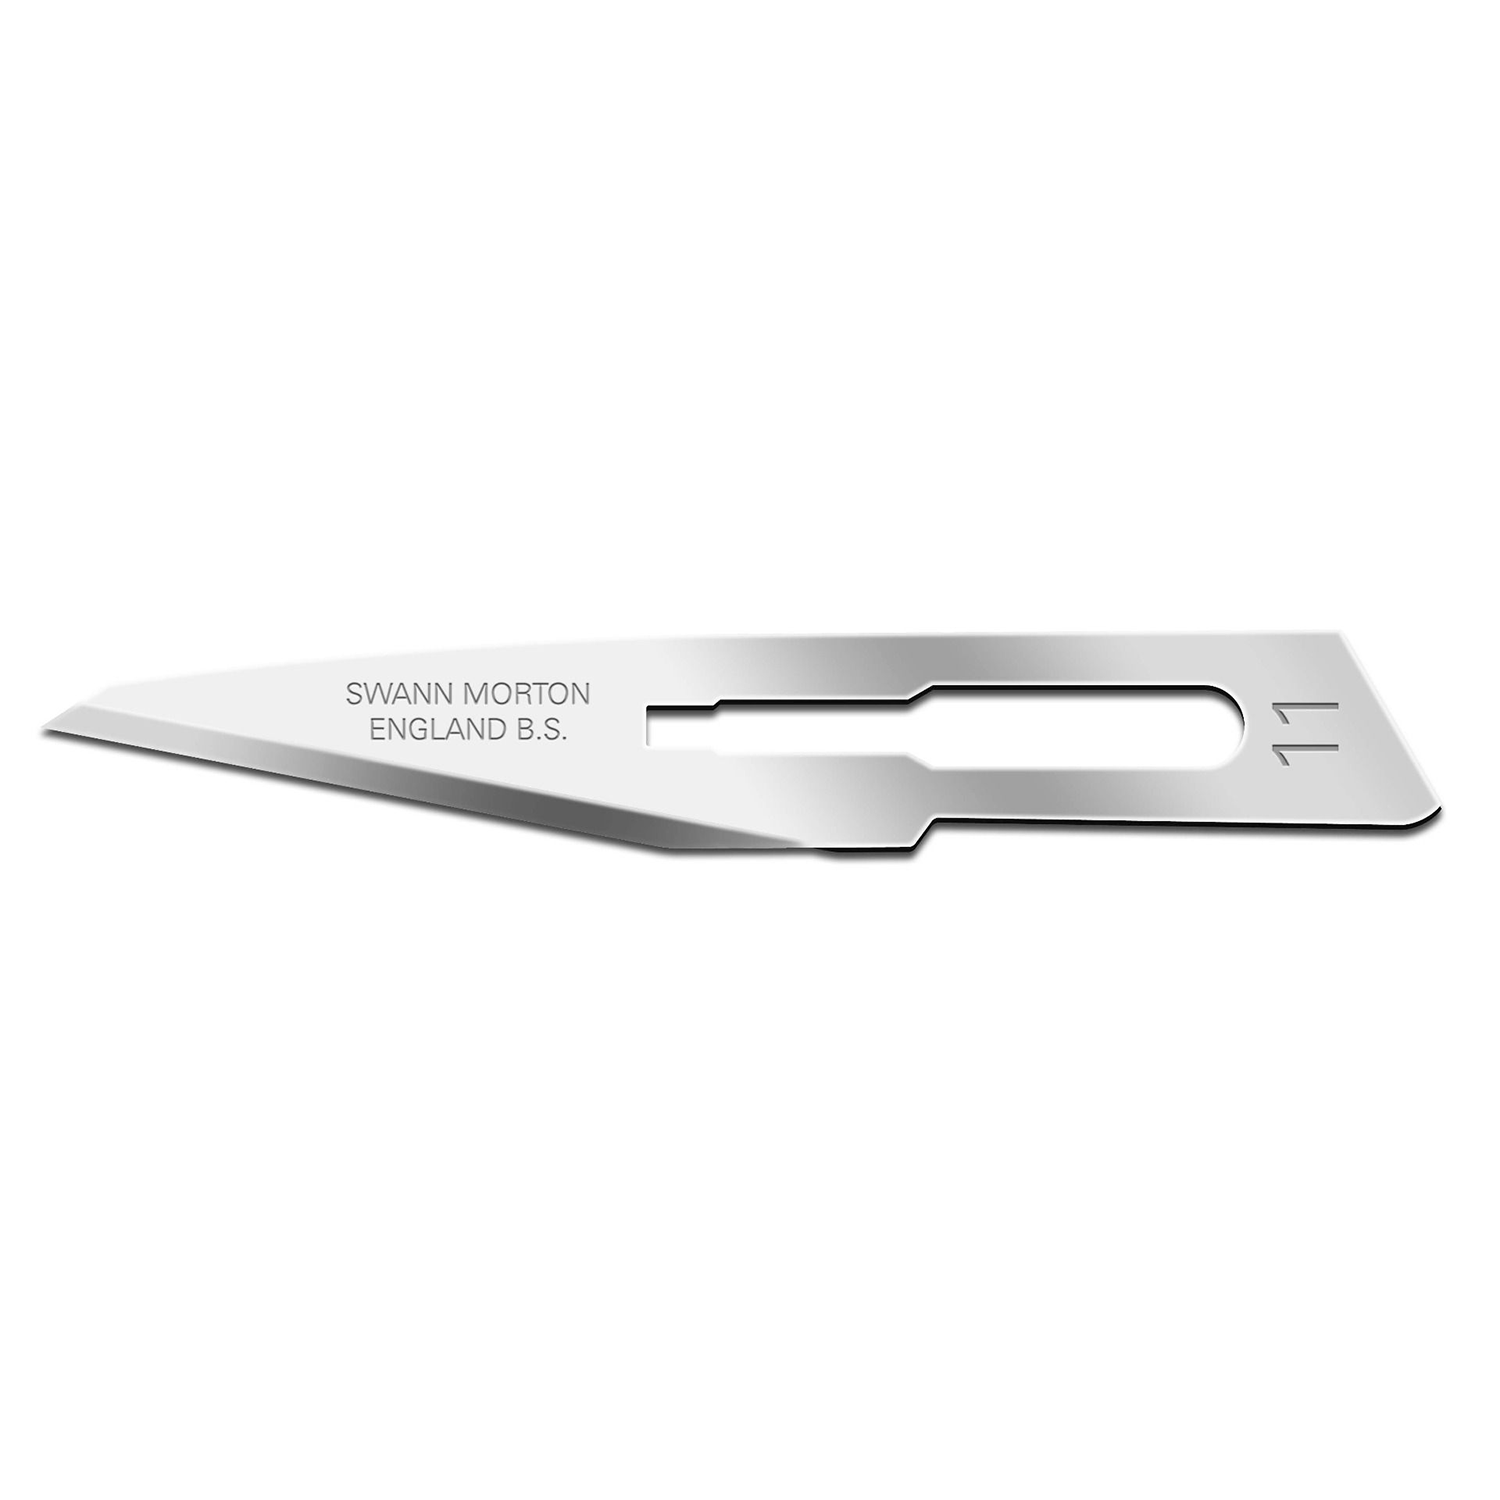 Swann Morton Carbon Steel Surgical Blades | No.11 | Sterile | Pack of 100